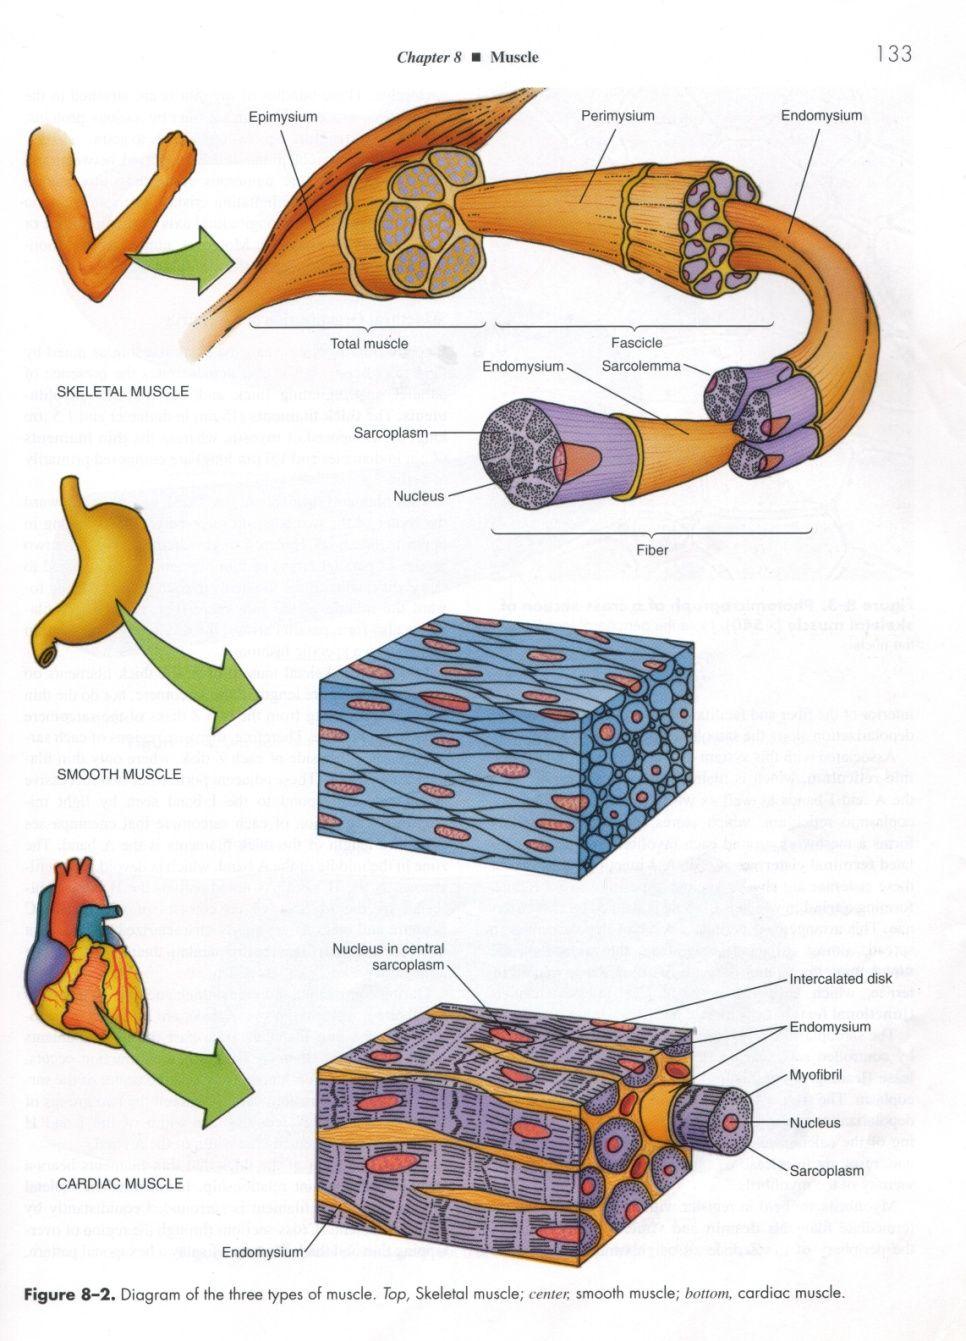 M uscle types 3 types of muscle: